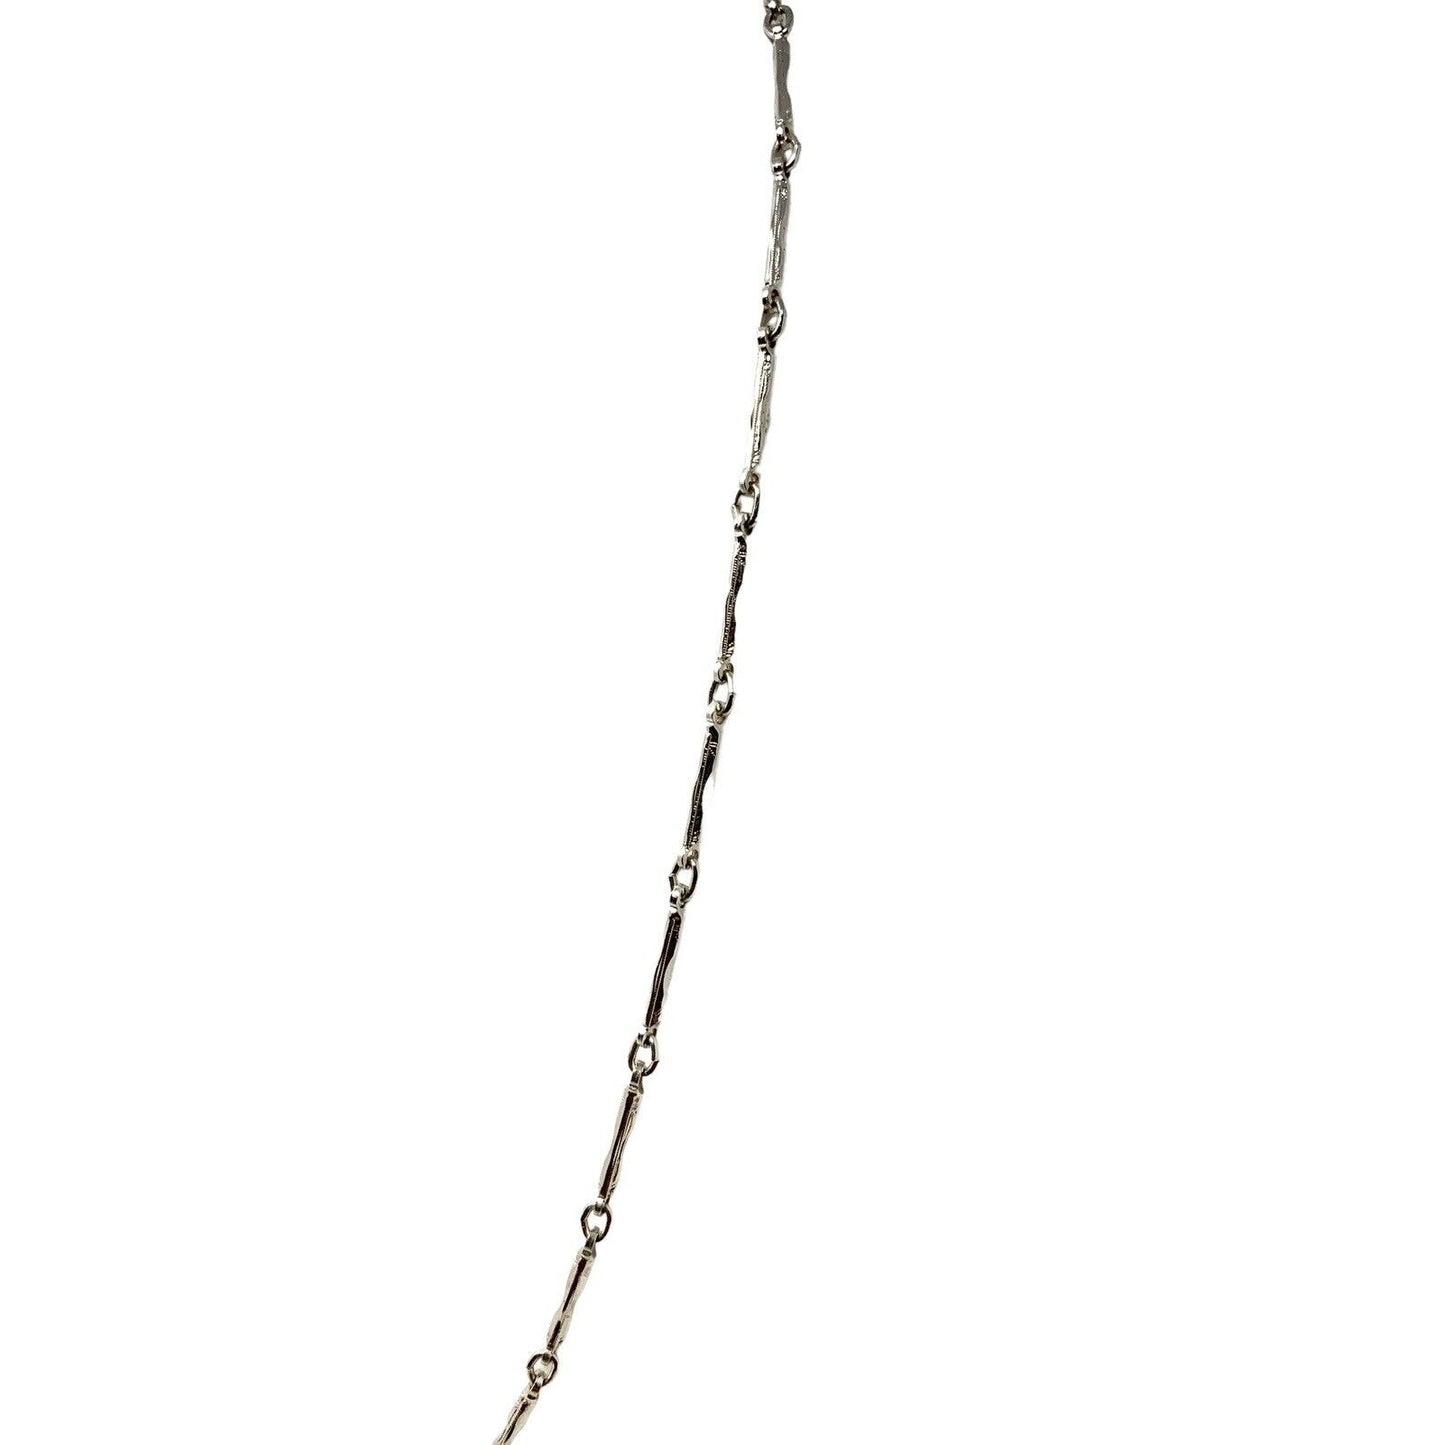 Silver Colored Bamboo Chain Link Necklace